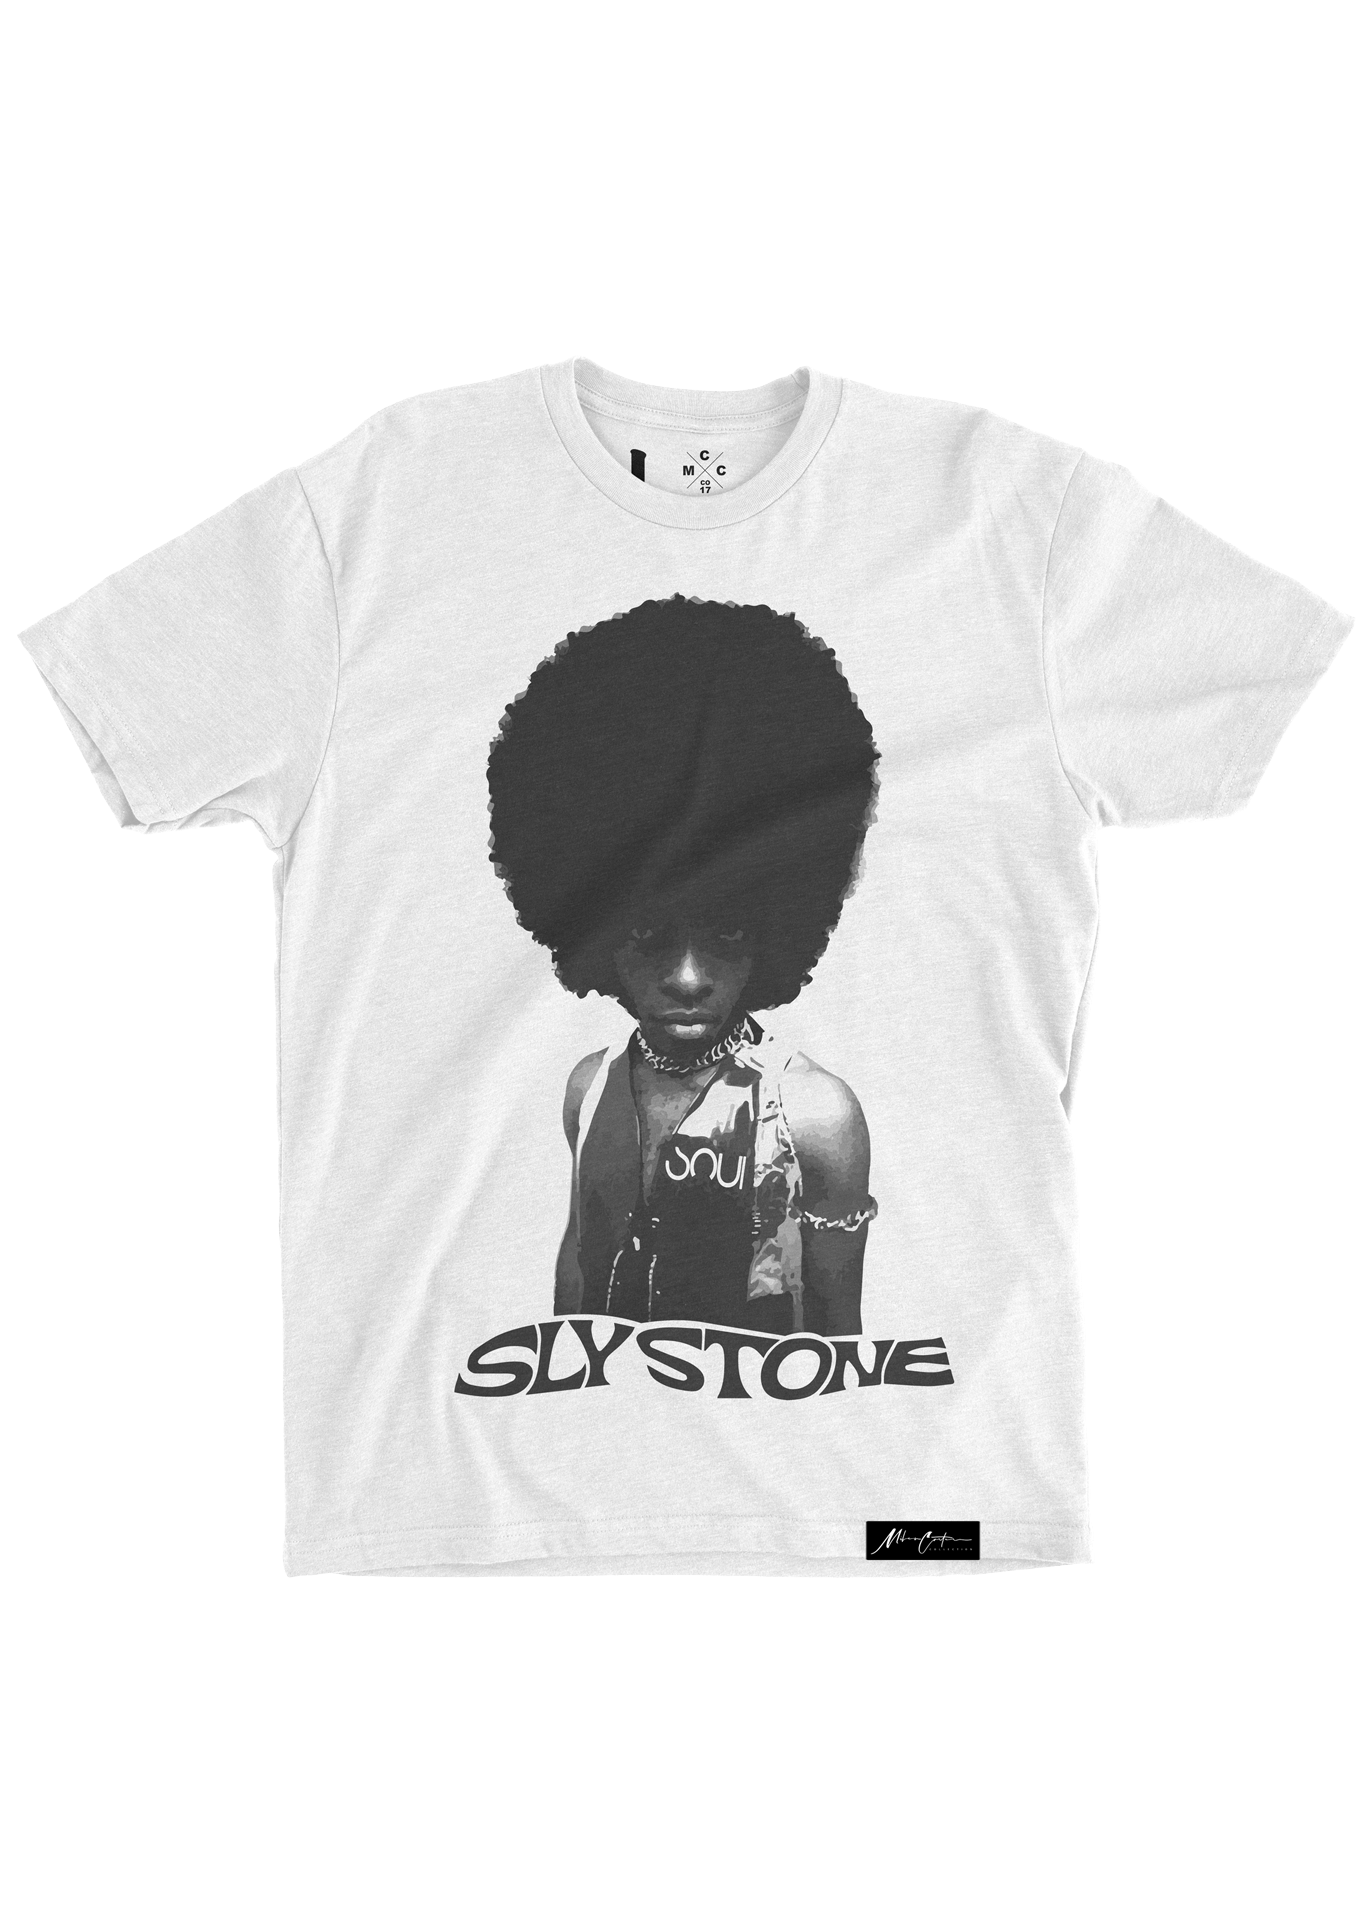 Miles Carter Designs Shirt For The People - Sly Stone